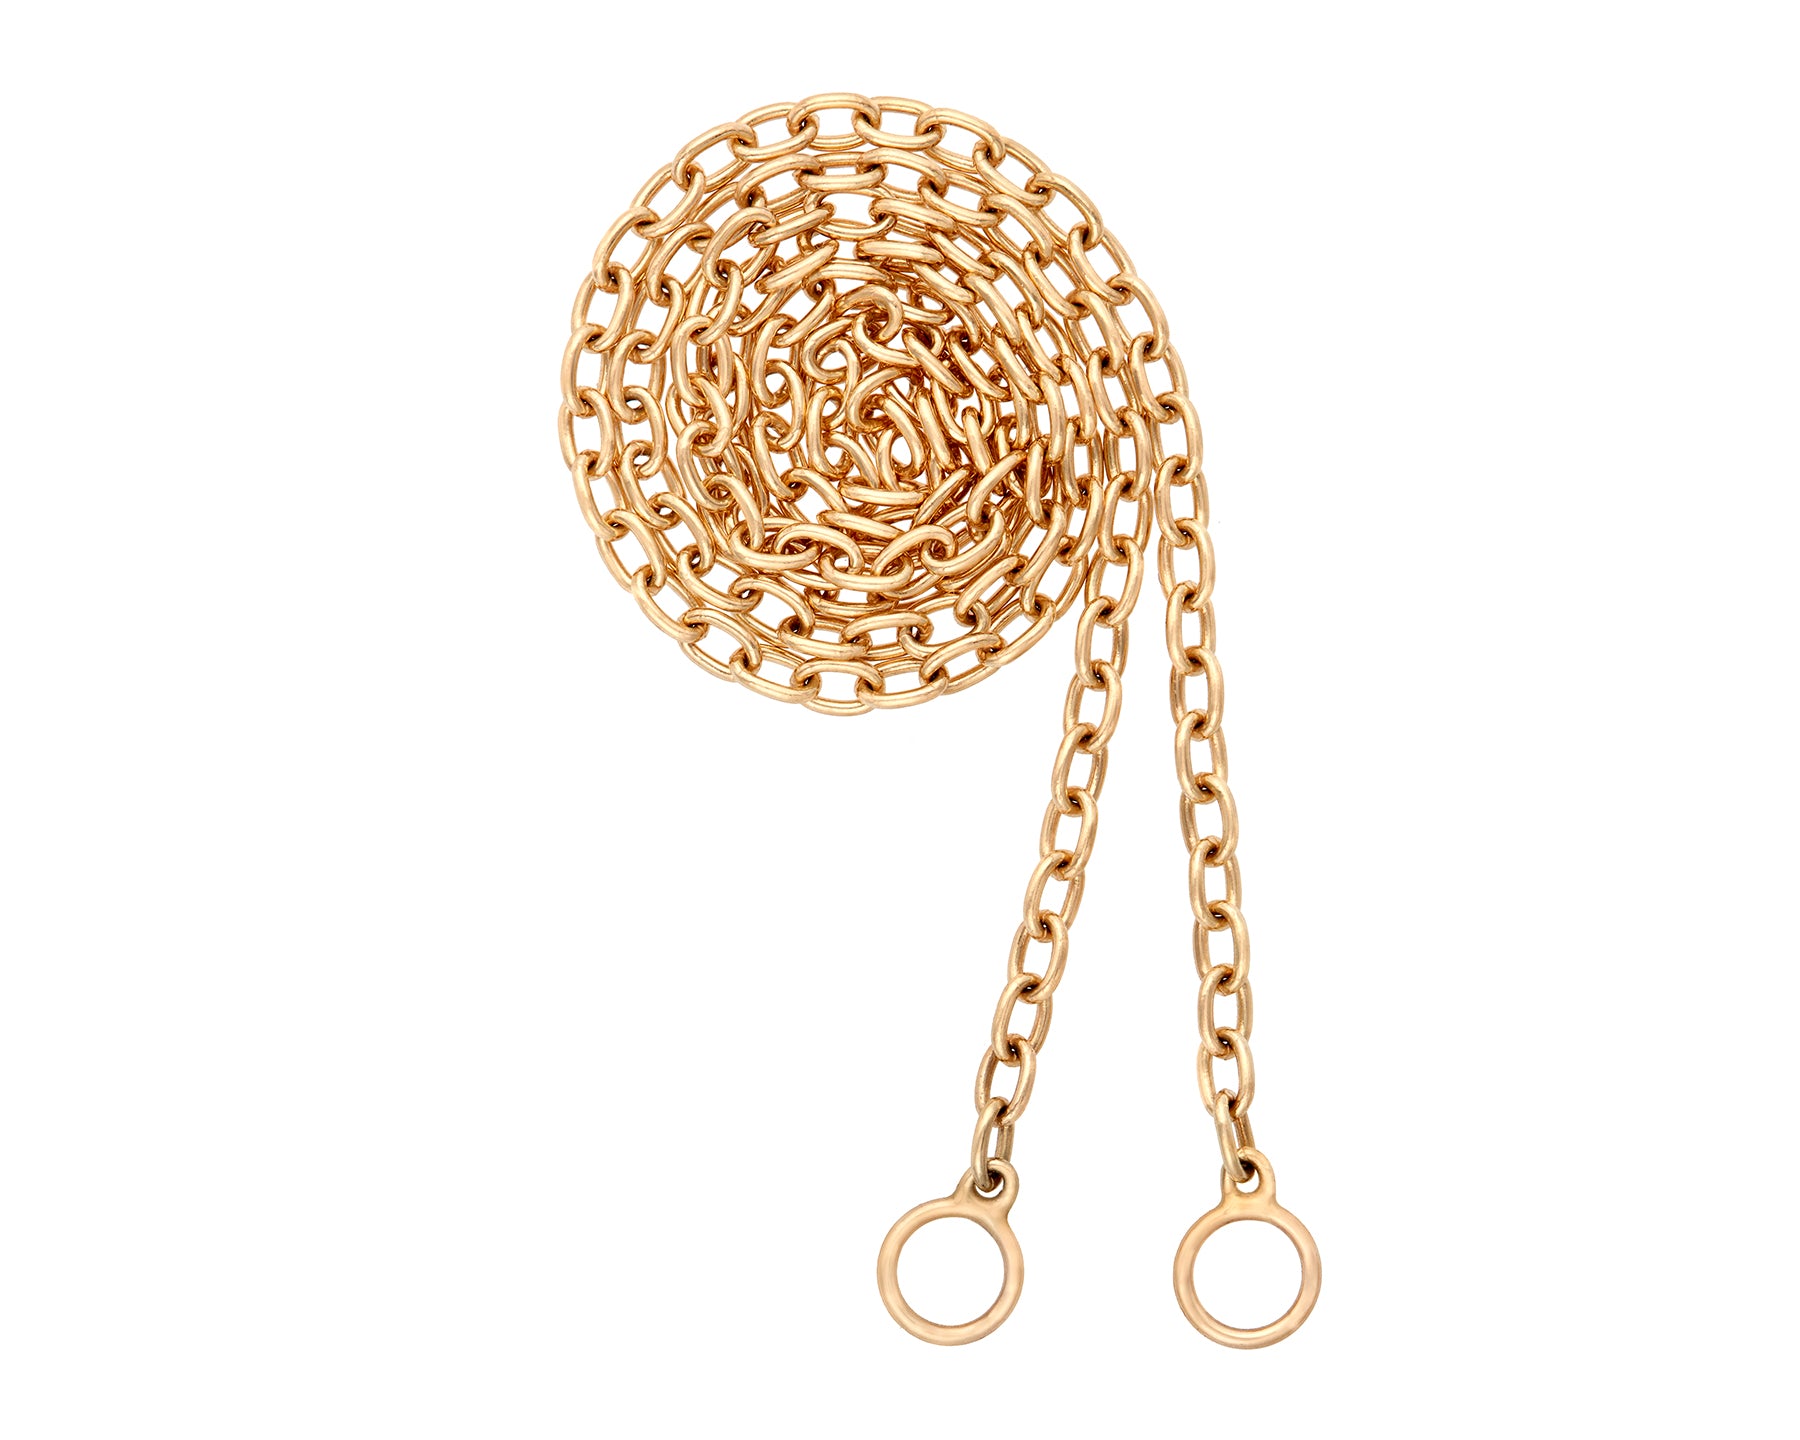 Curled up gold pulley chain